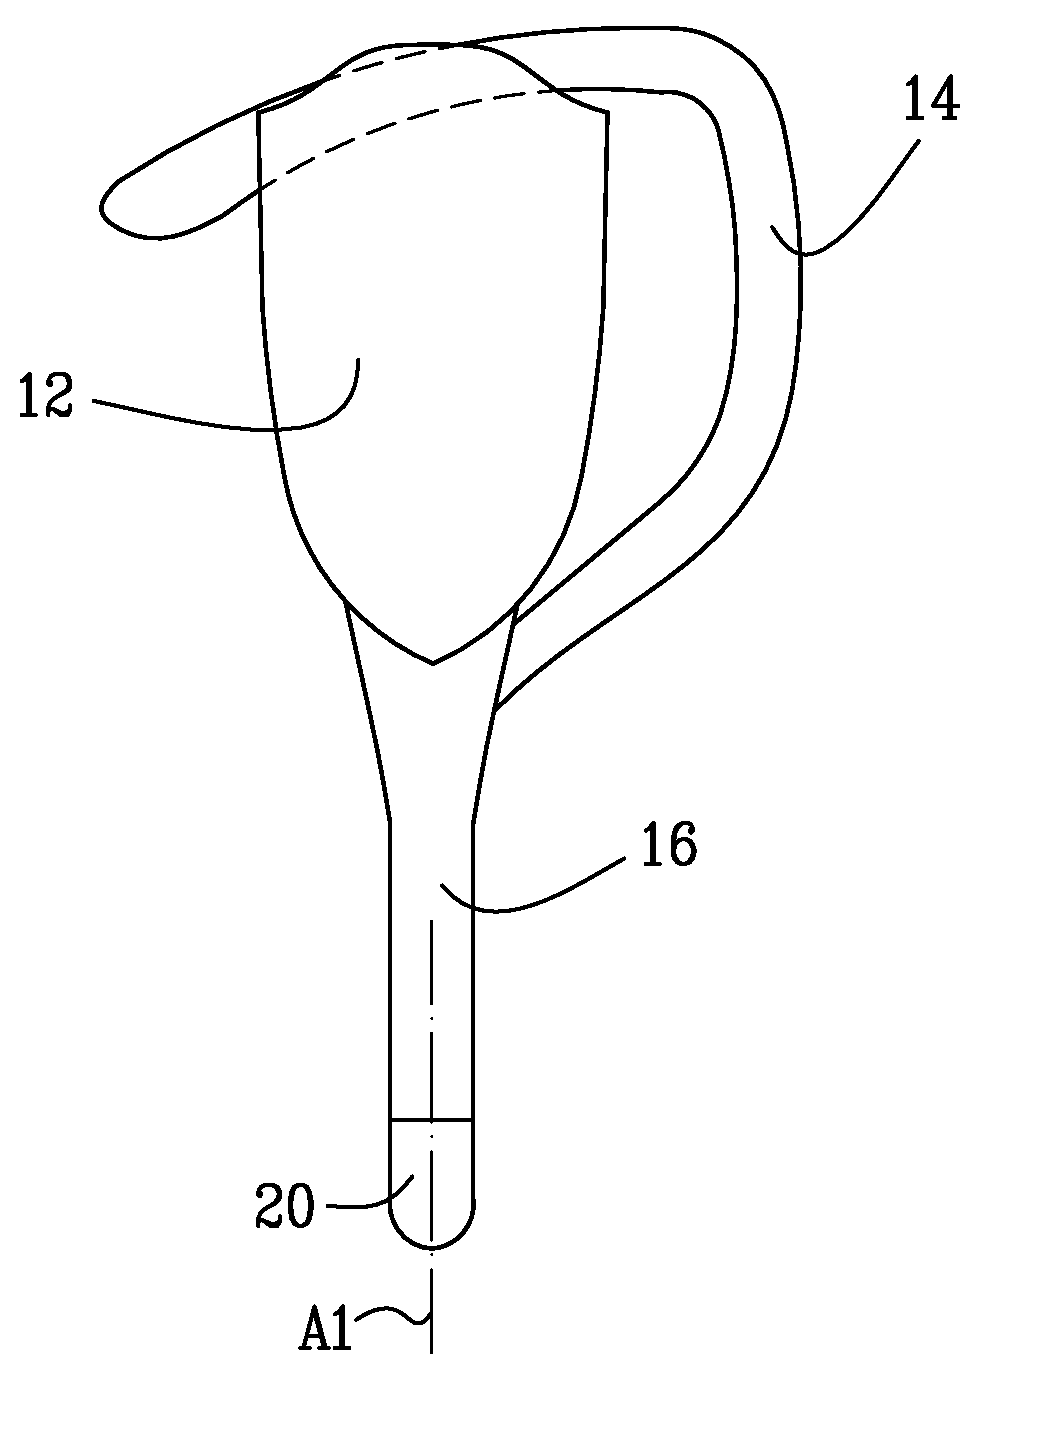 Noise reduction system and method